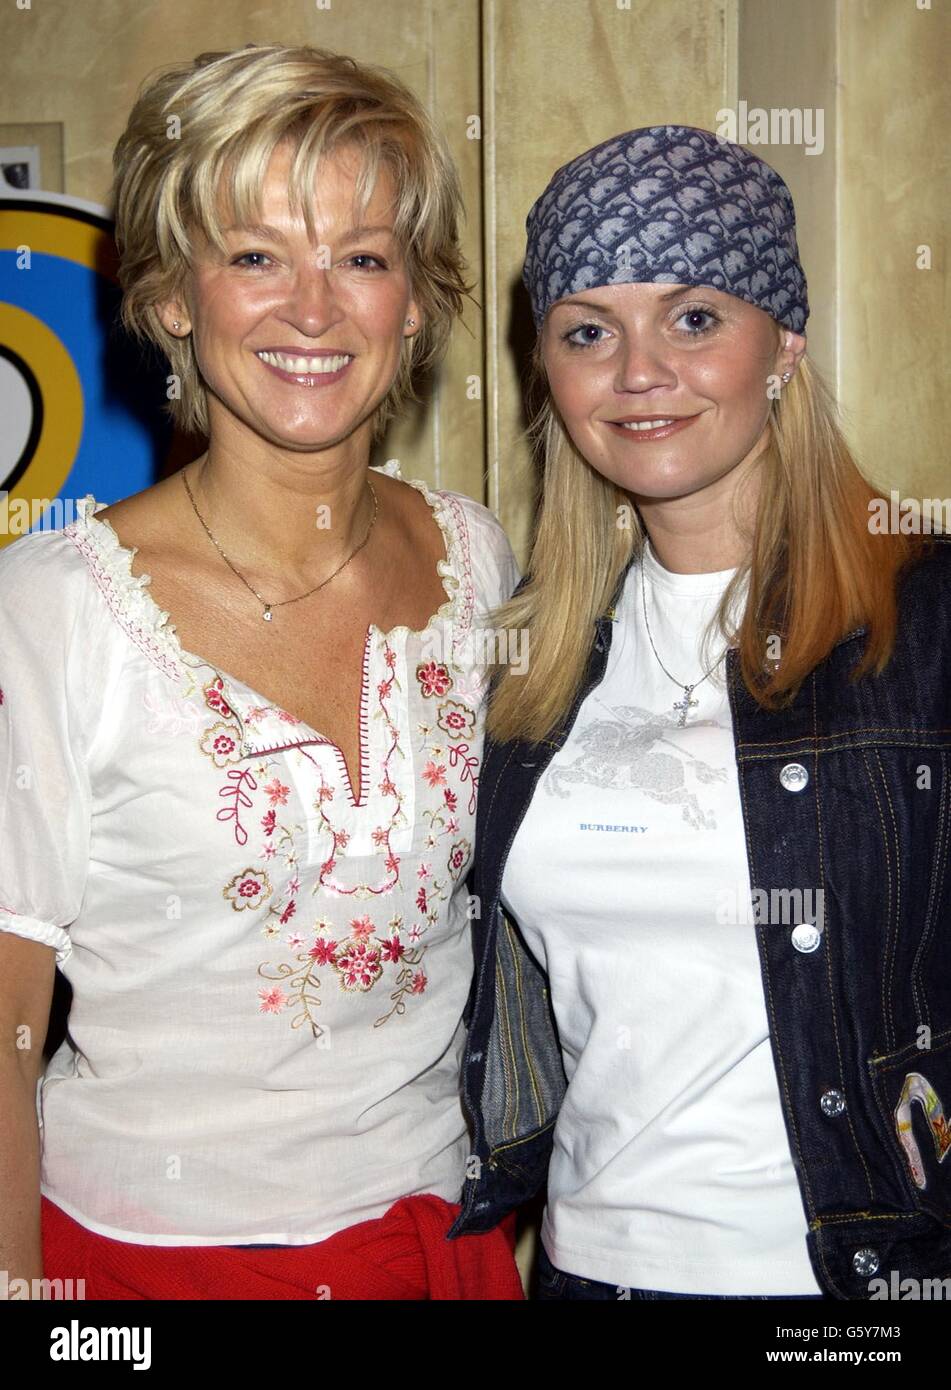 Former Eastenders actresses Gillian Taylforth (left) and Danniella Westbrook  at a screening of the new film 'Stuart Little 2' at Planet Hollywood in  London. 06/09/02 Danniella Westbrook, who is to make her